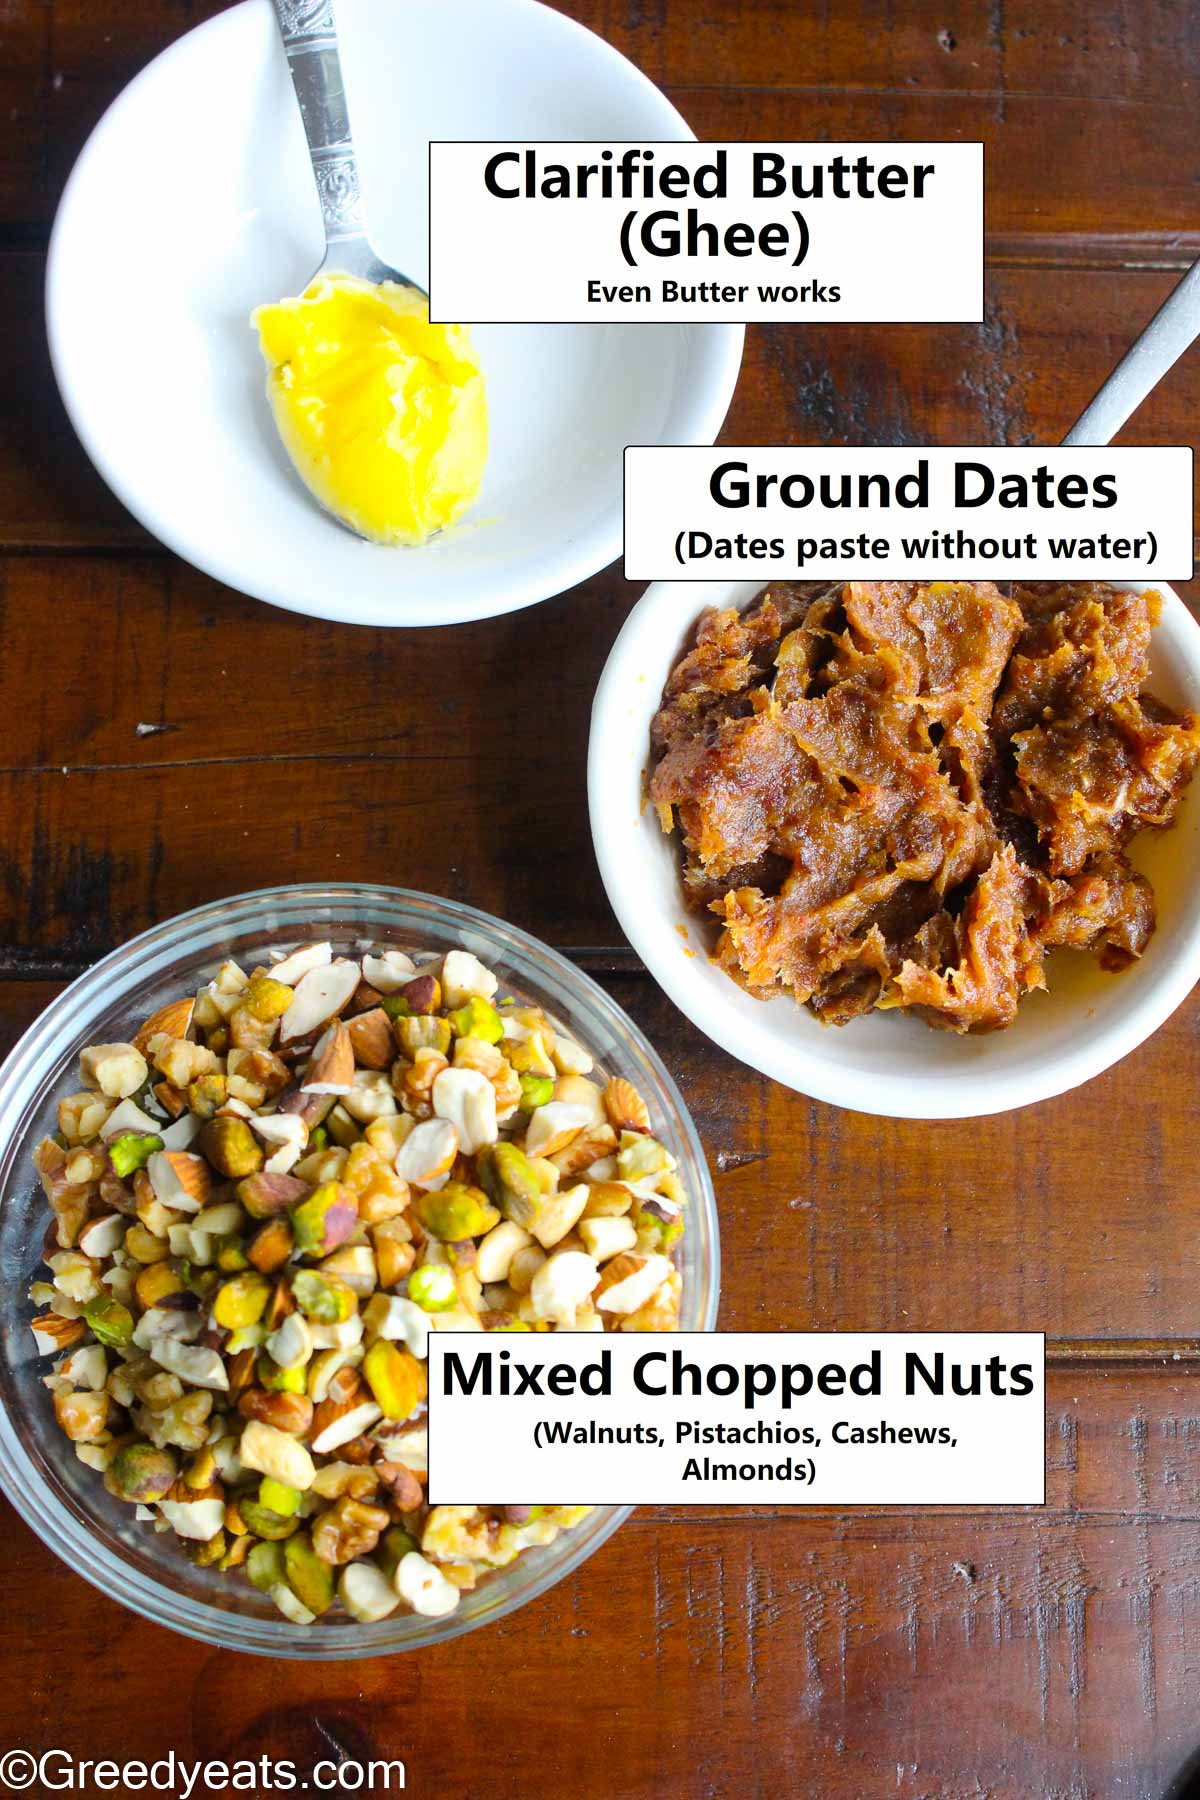 Ingredients like mixed chopped nuts, dates paste and butter to make Date energy bars.